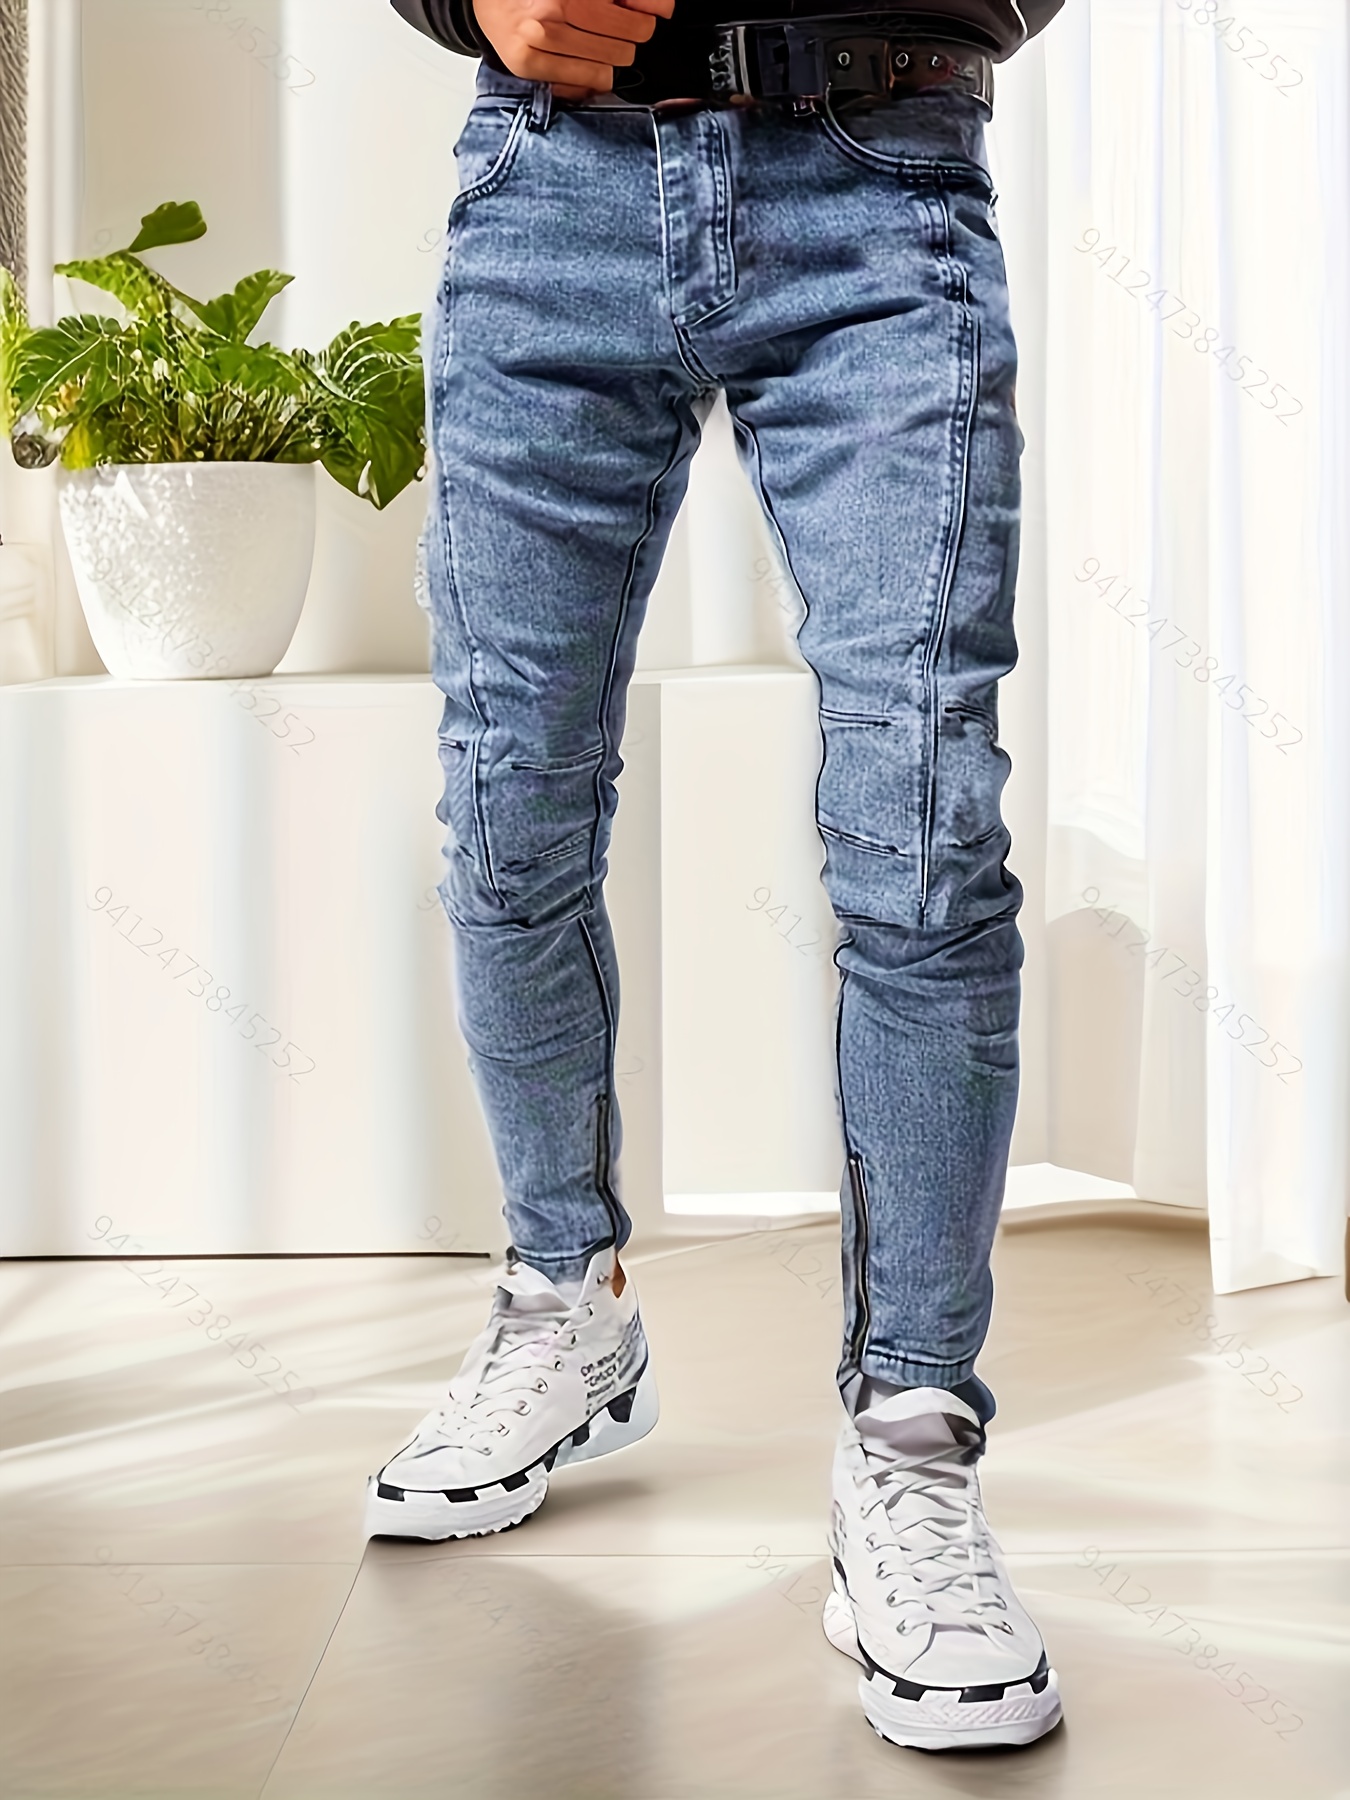 Men's Stretch Skinny Biker Jeans with Ripped Holes - Comfy & Stylish